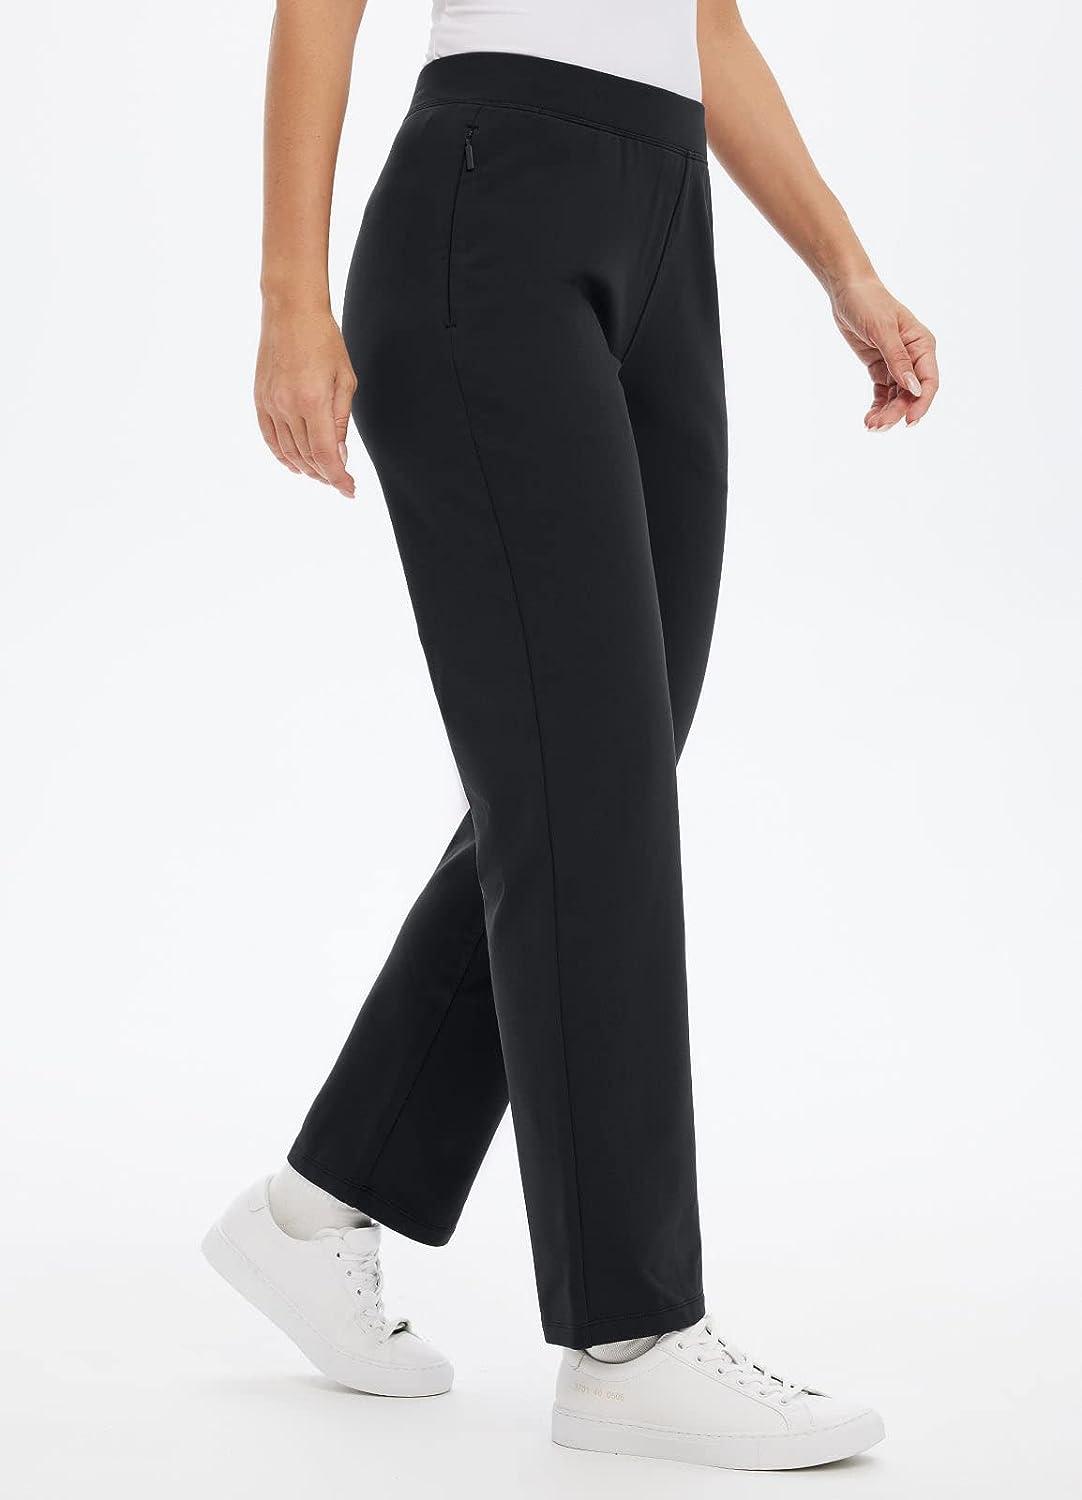 Women'S Fleece-Lined Sweatpants With Large Pockets